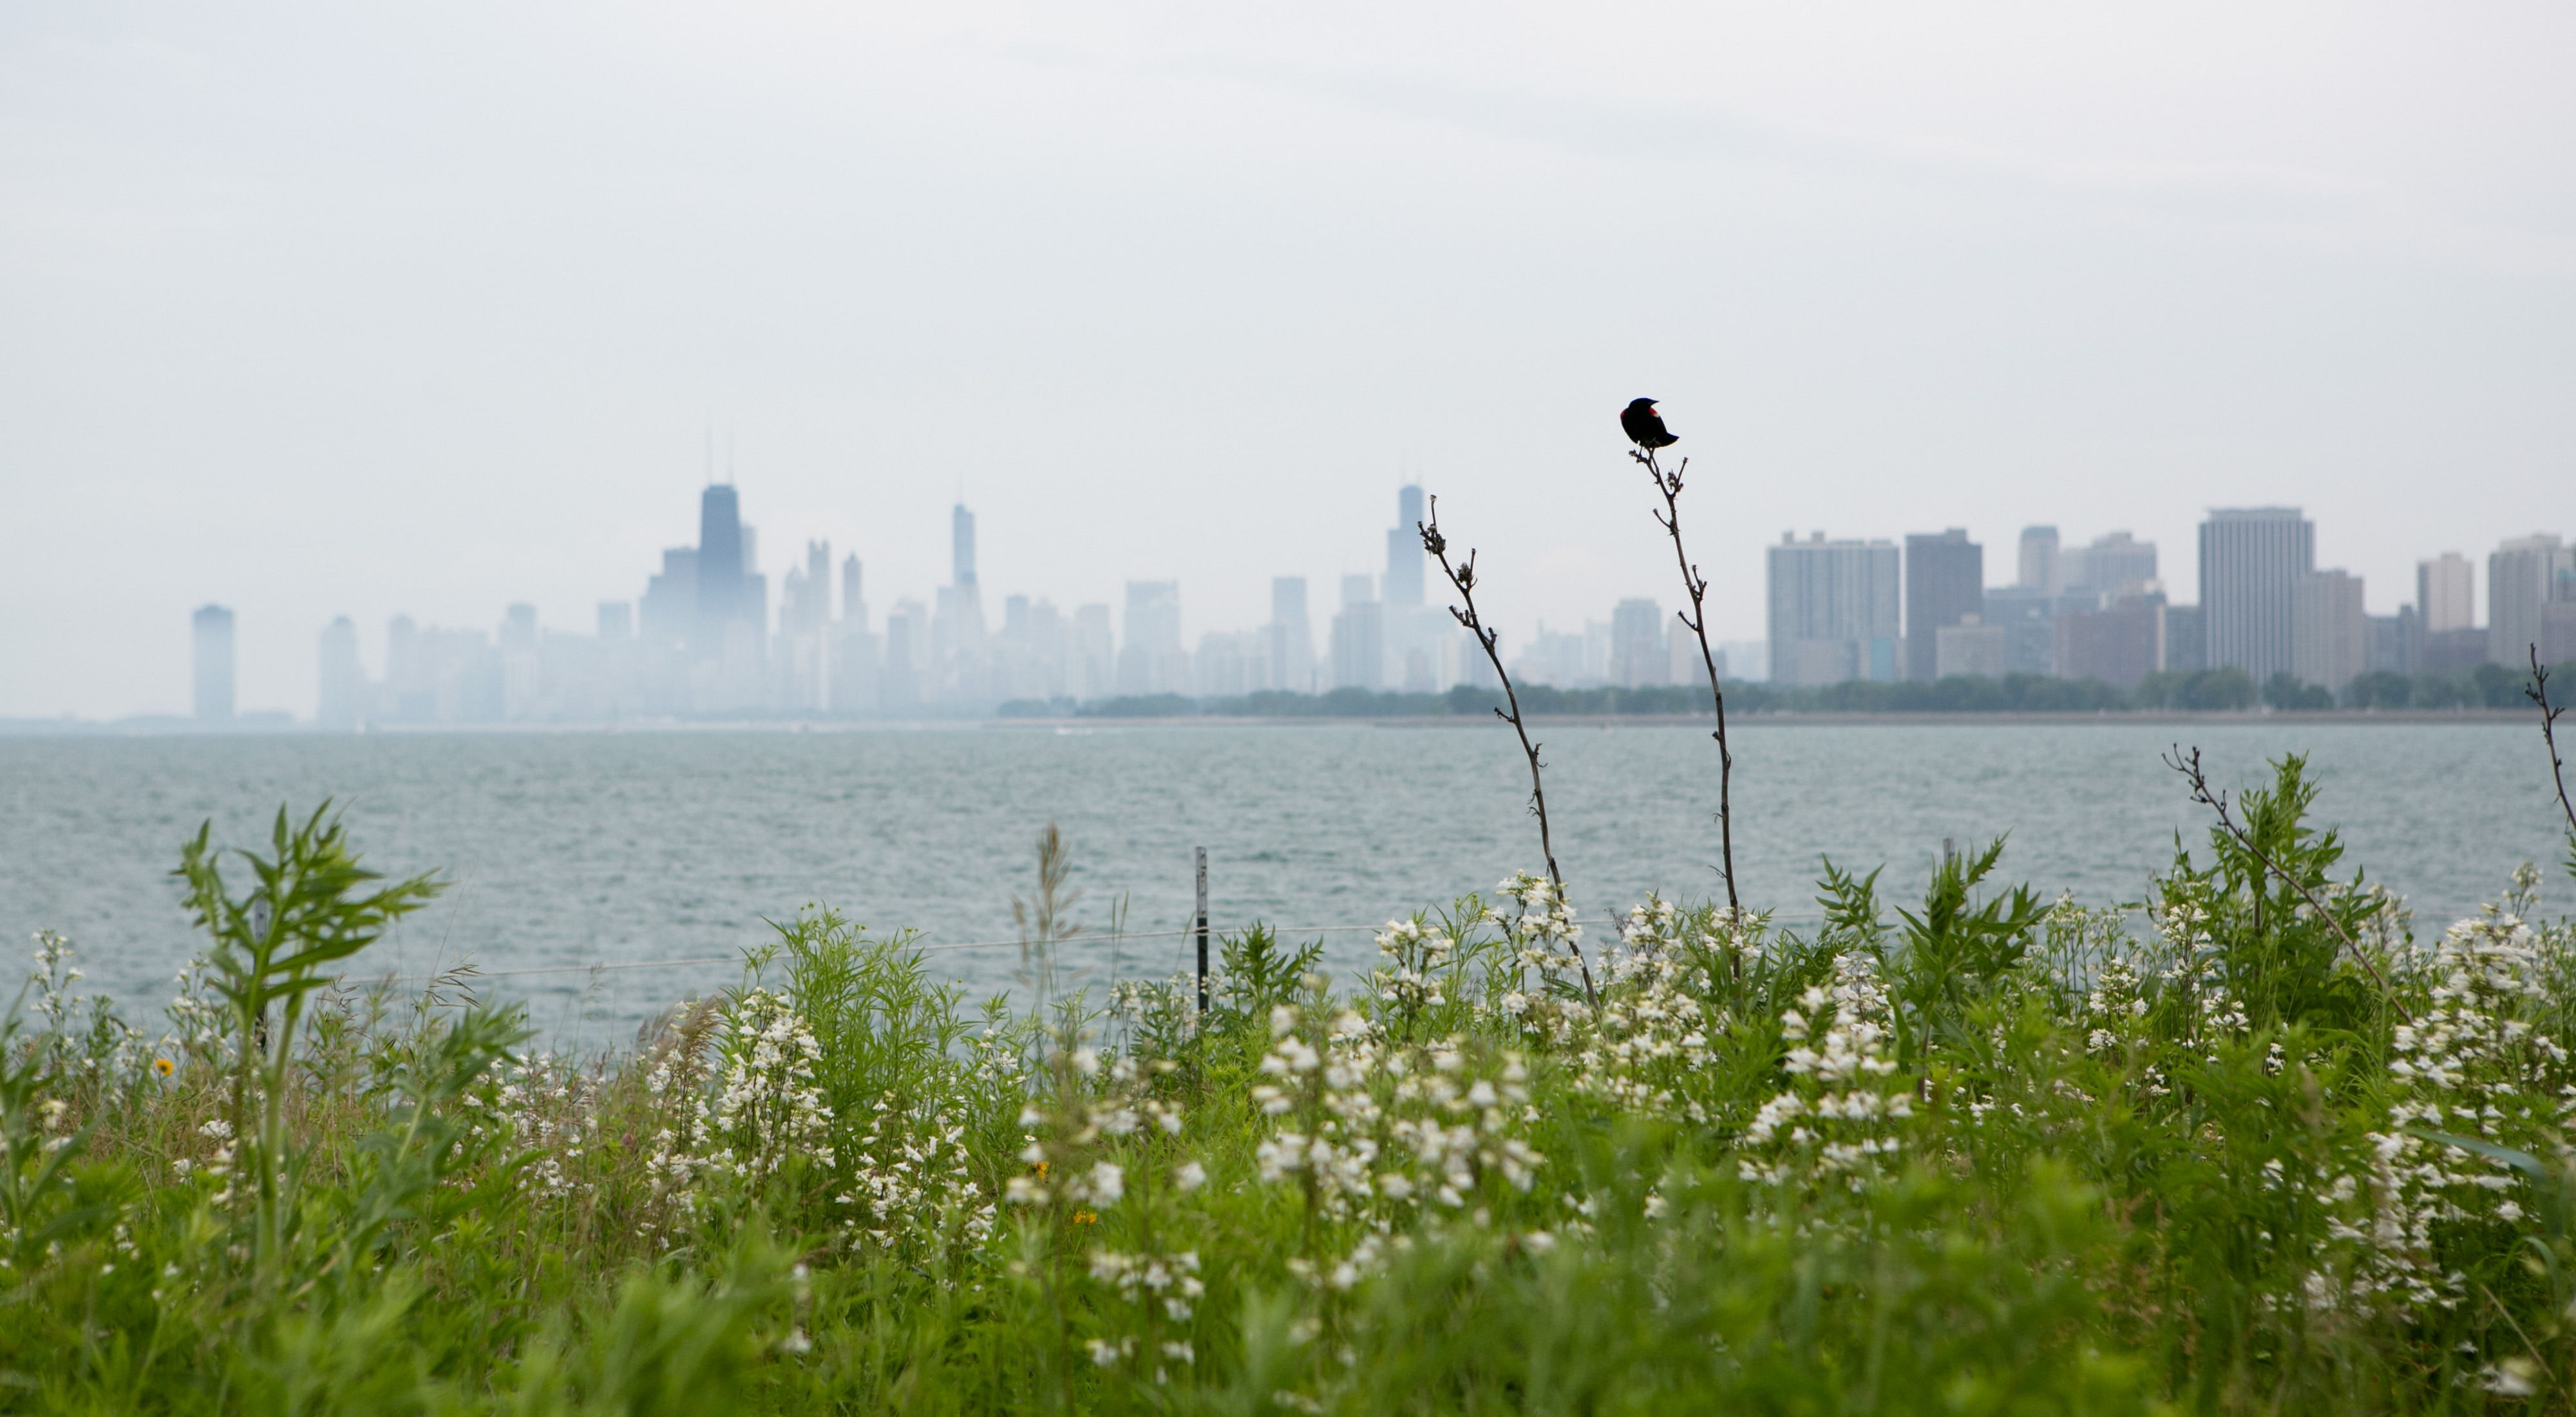 at the Montrose Harbor bird sanctuary during a stewardship day on Saturday, June 22, 2013.